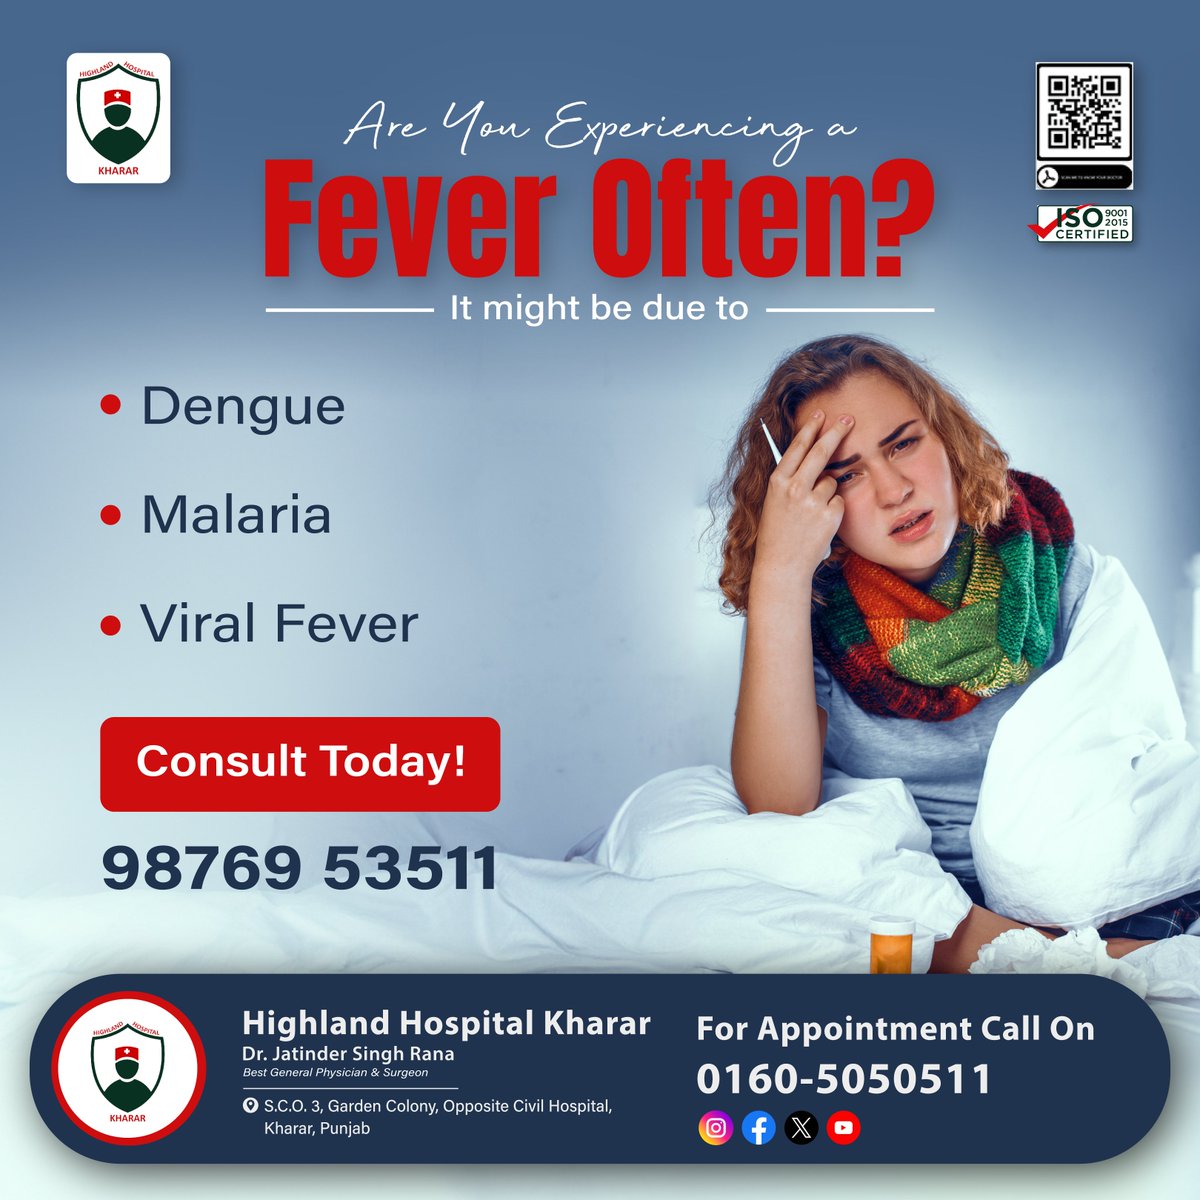 #Summer is here, but so is the #risk of #fever! At #HighlandHospitalKharar, we're shedding light on the #reasons behind summer fevers. Stay informed, stay #healthy!
.
#StayInformed #StayHealthy #SummerHealthTips #BeatTheHeat #Kharar #Mohali #DrJatinderSingh #Besthospital